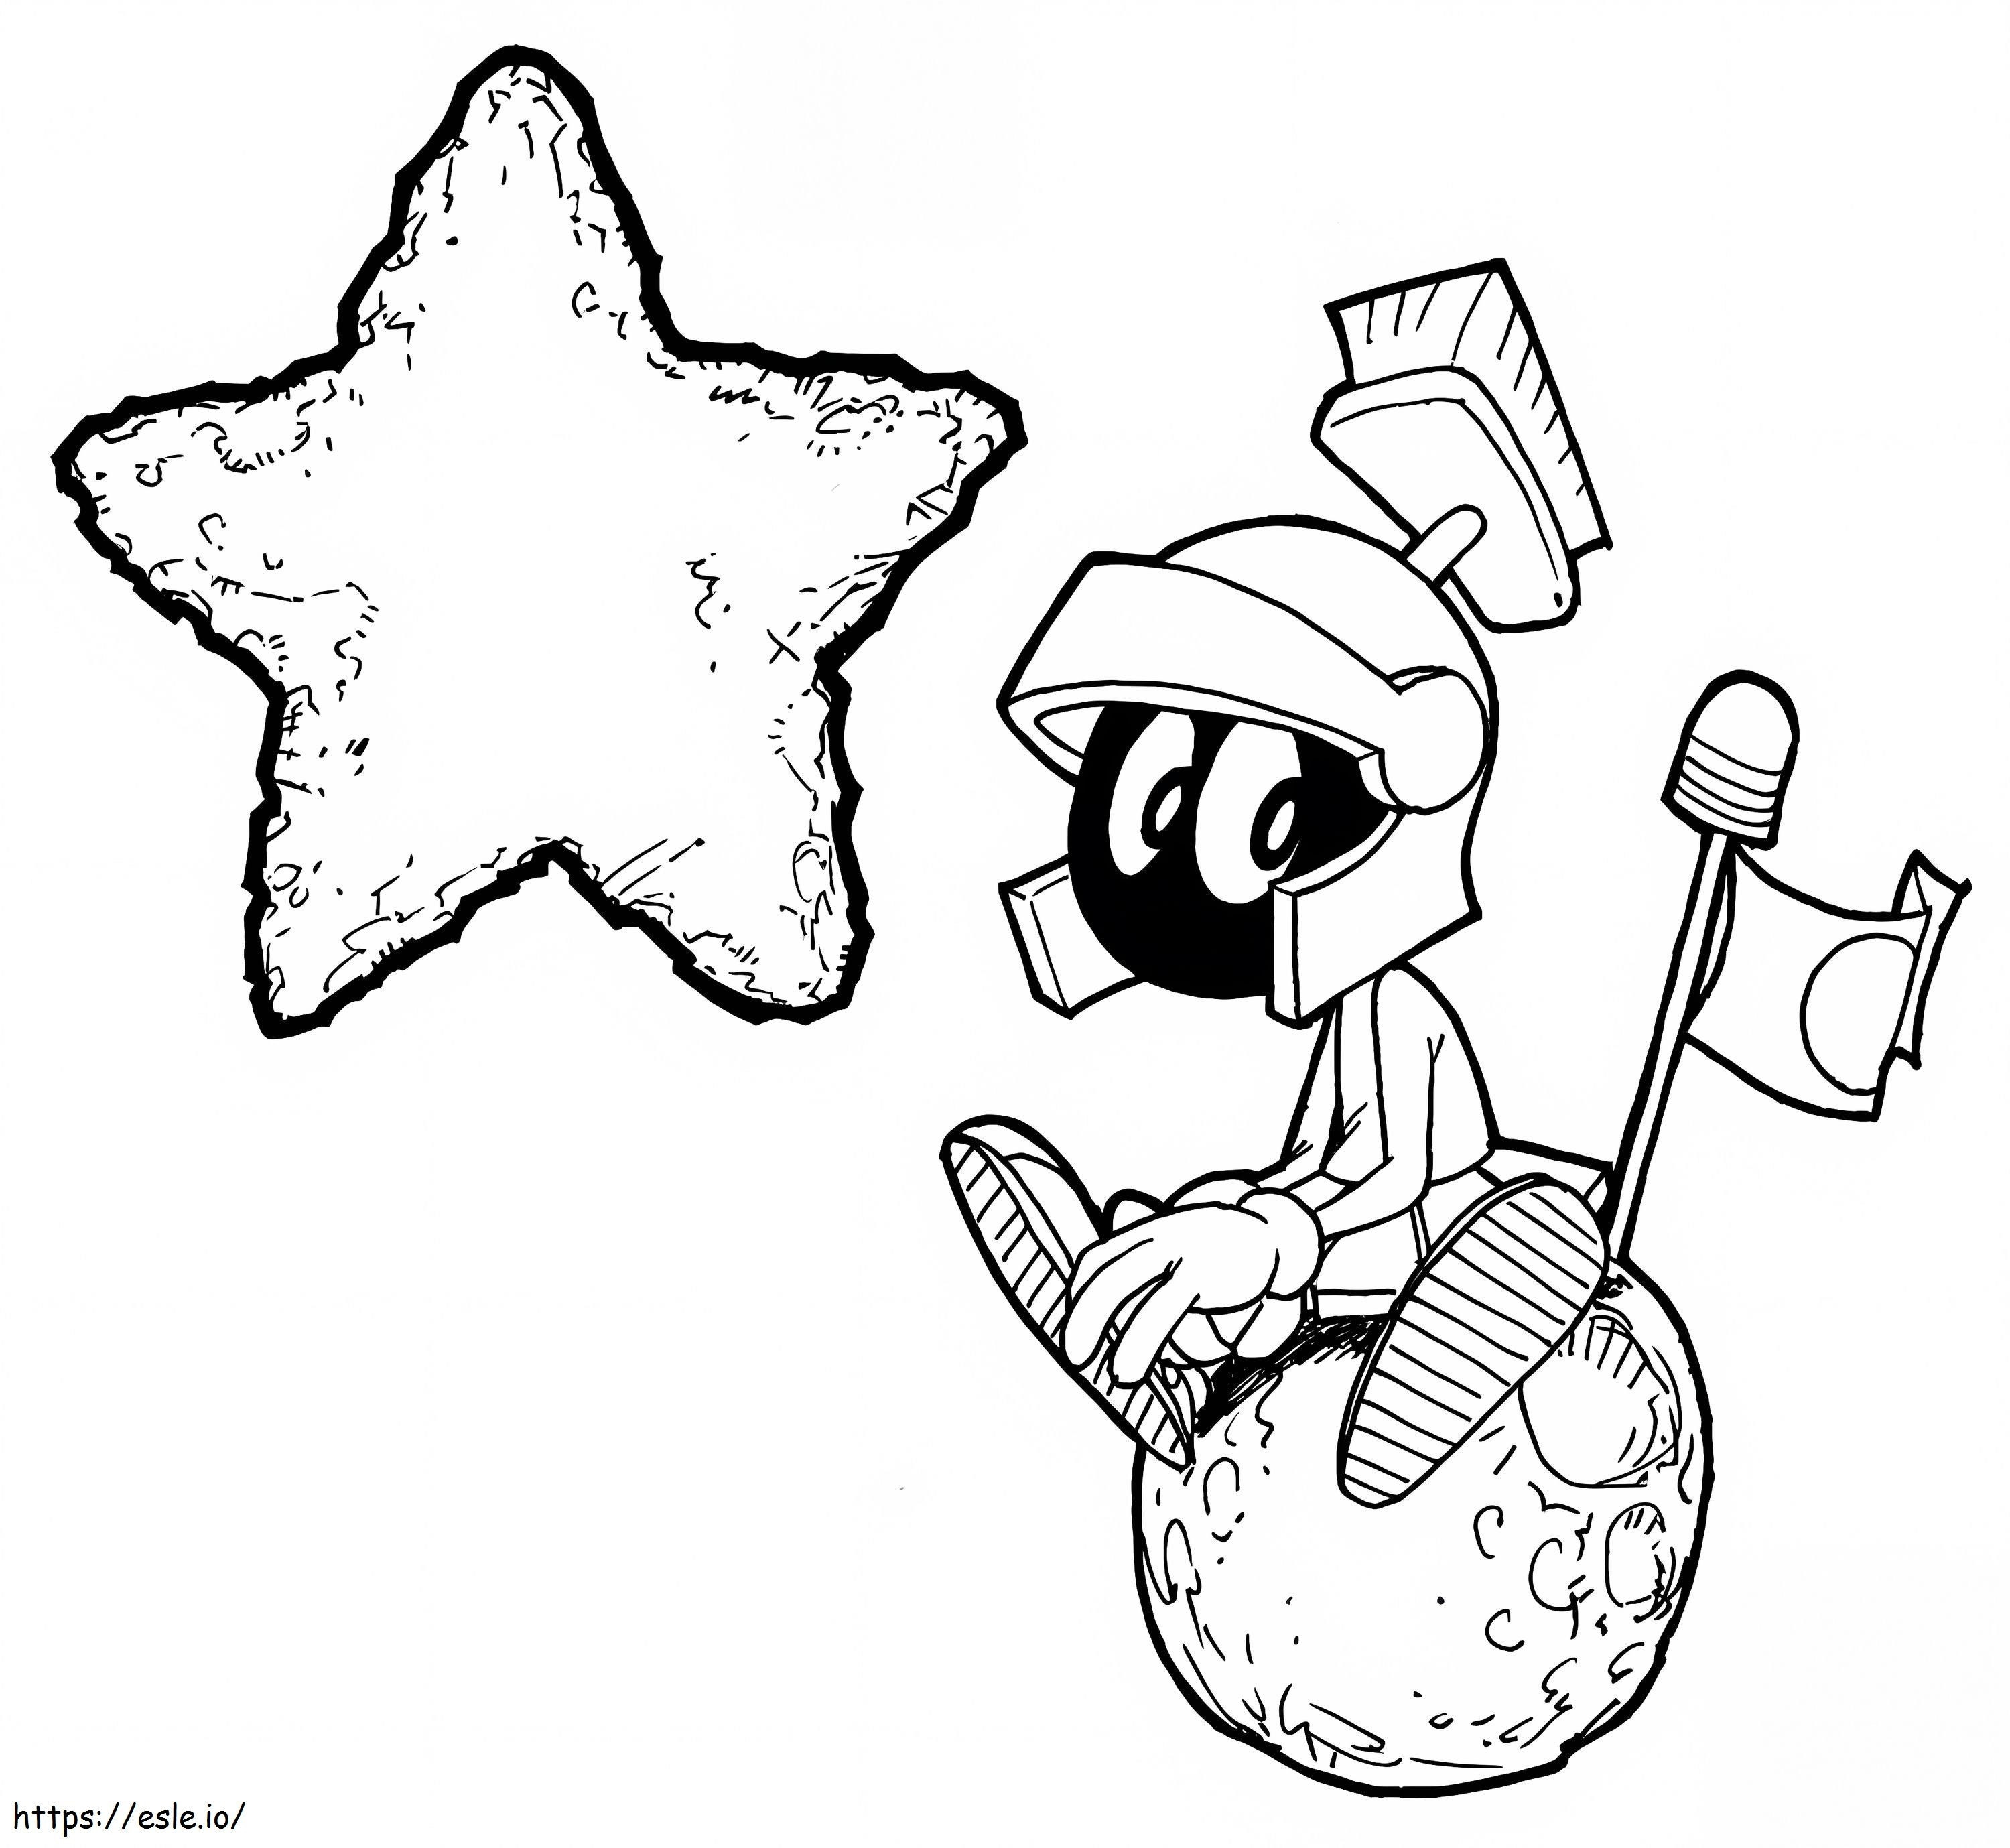 Marvin The Martian 13 coloring page